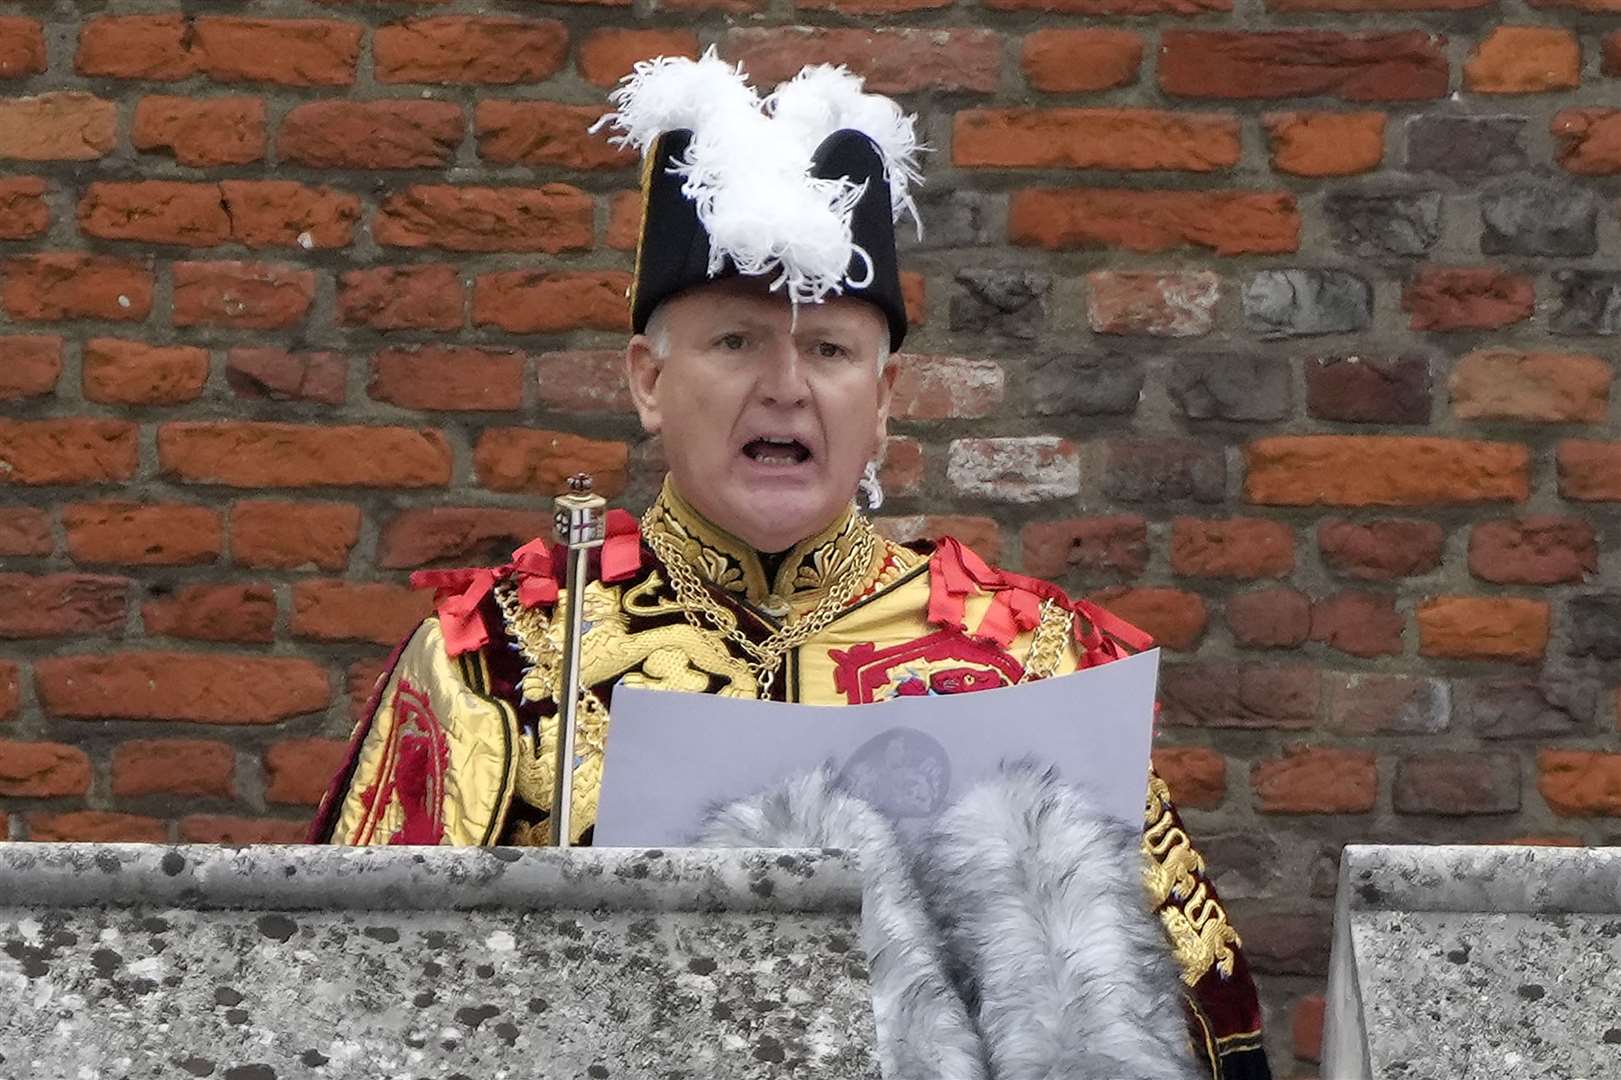 Garter Principle King of Arms, David Vines White reads the proclamation of new King, King Charles III, from the Friary Court balcony (Kirsty Wigglesworth/PA)